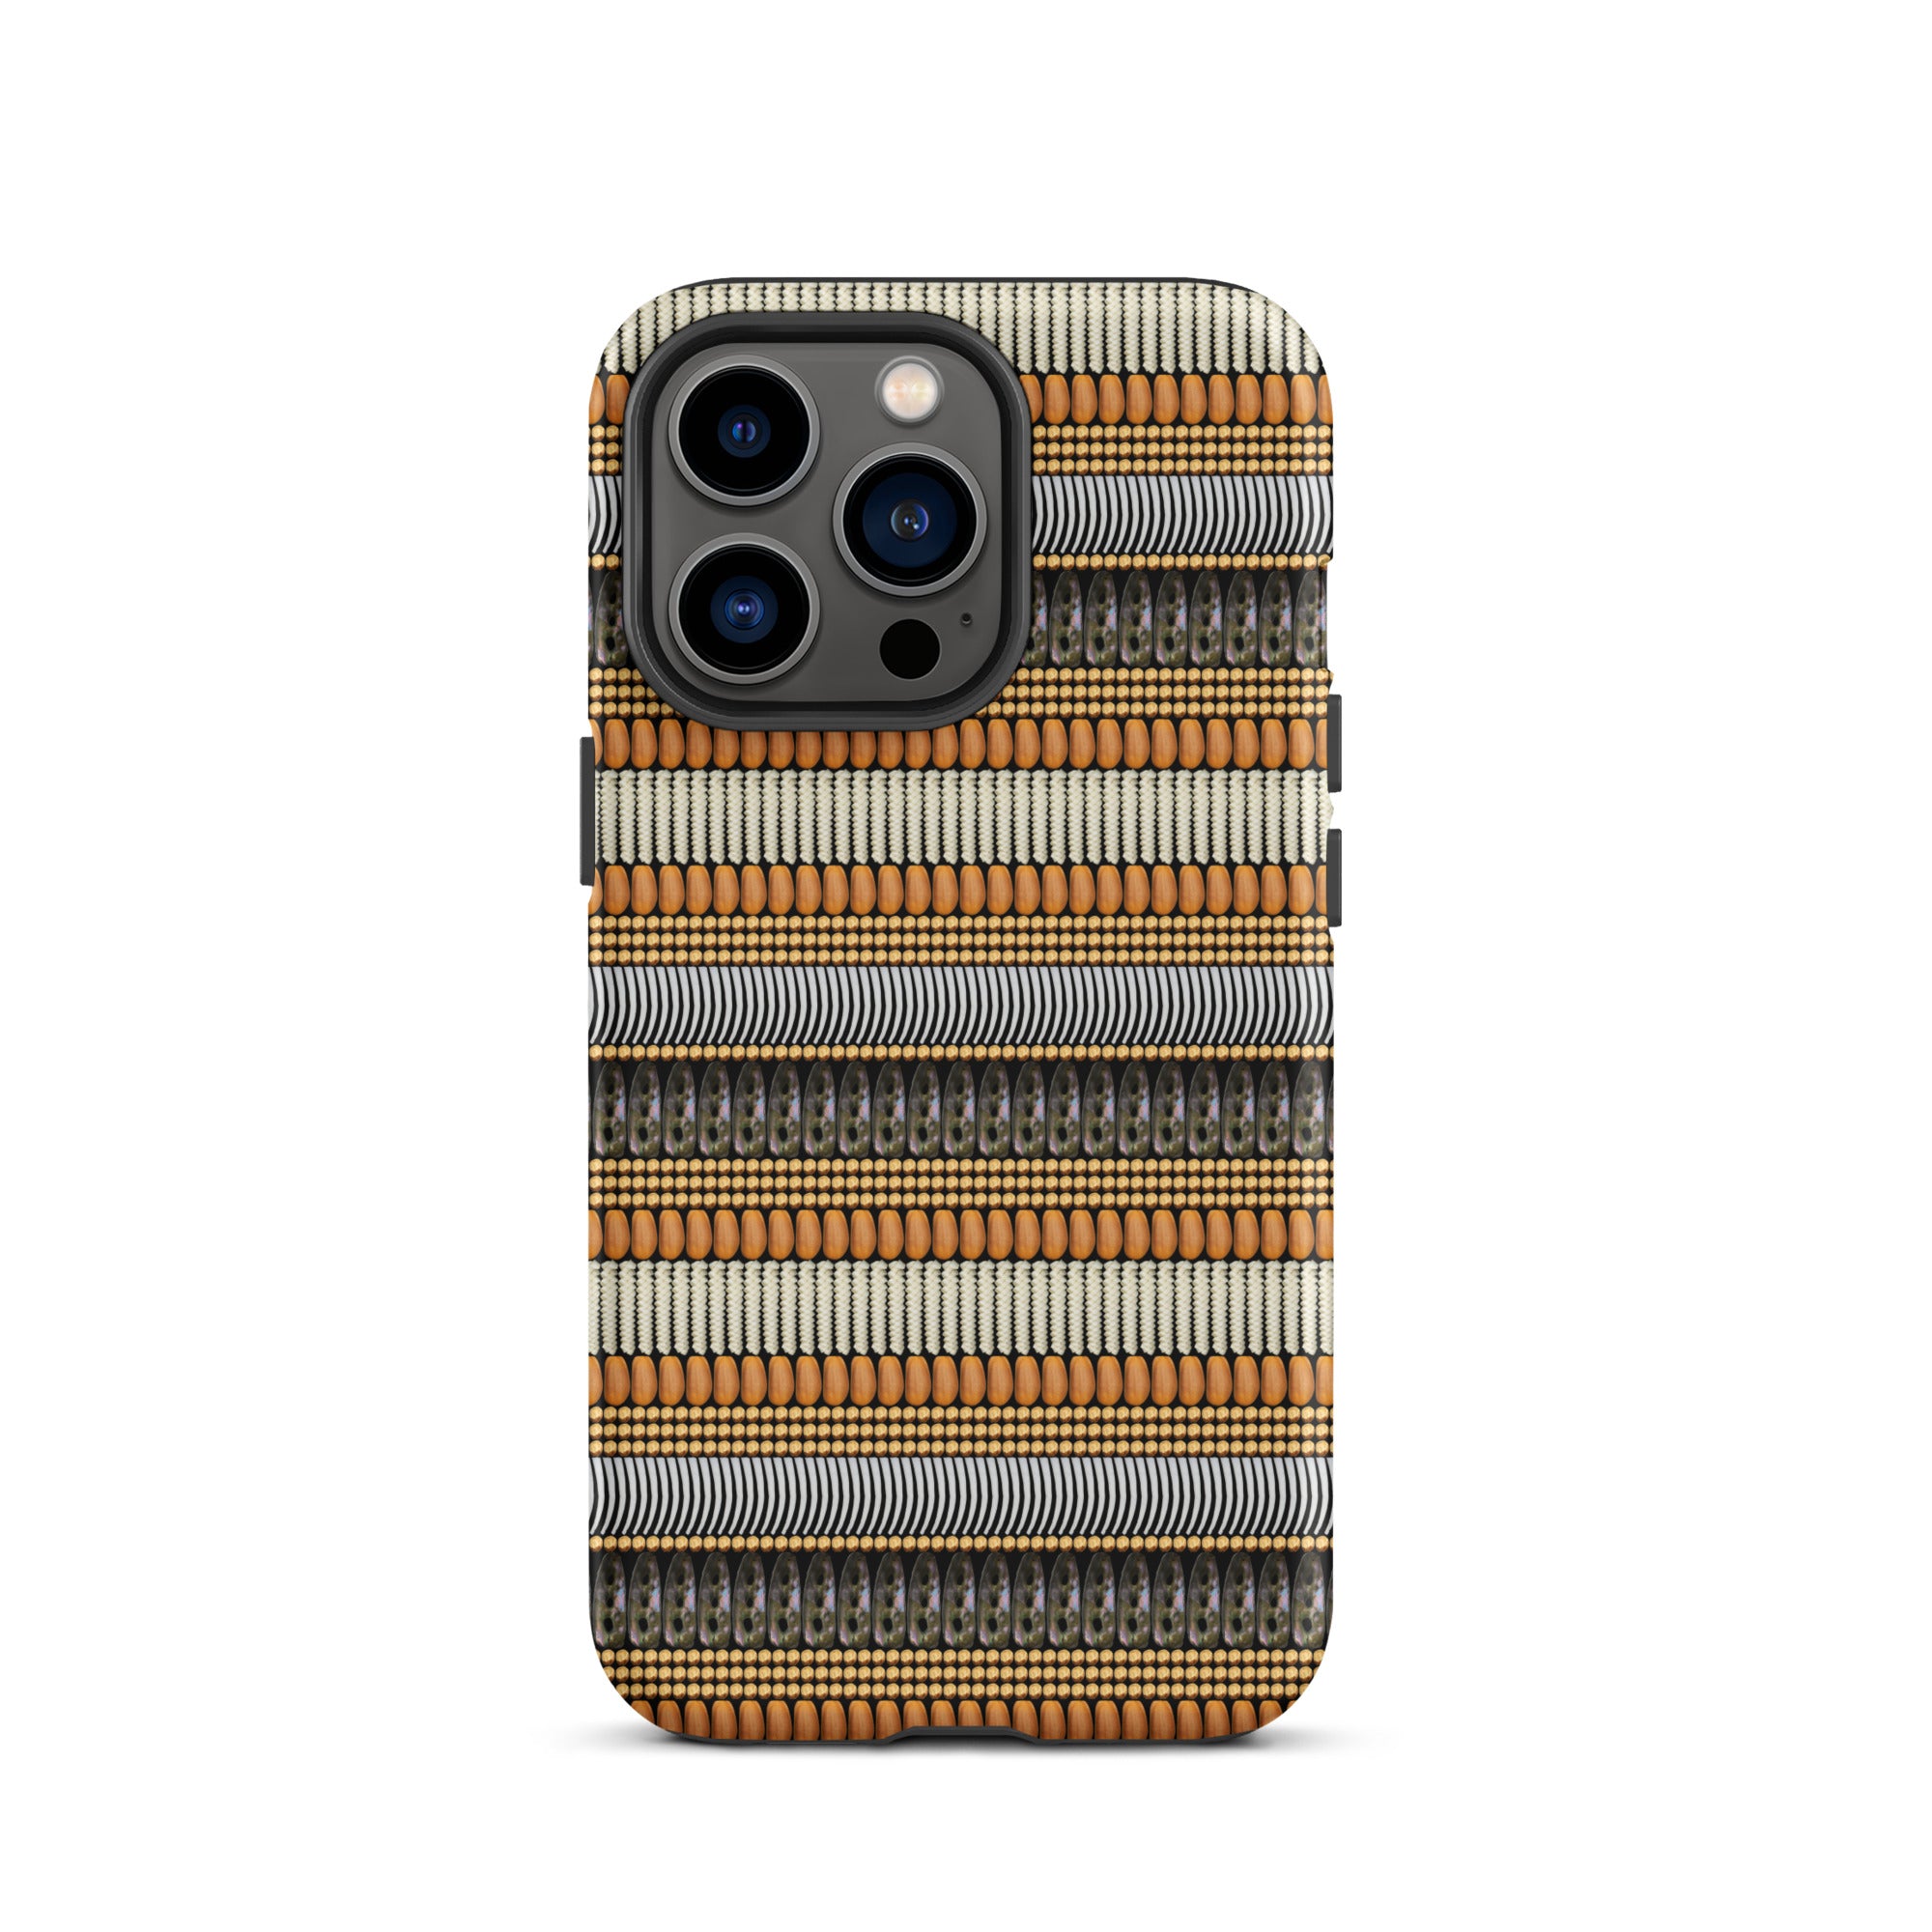 Tough Case for iPhone With Pinenuts, Beargrass, Dentalium, Abalone, and Cedar Berrie Image.